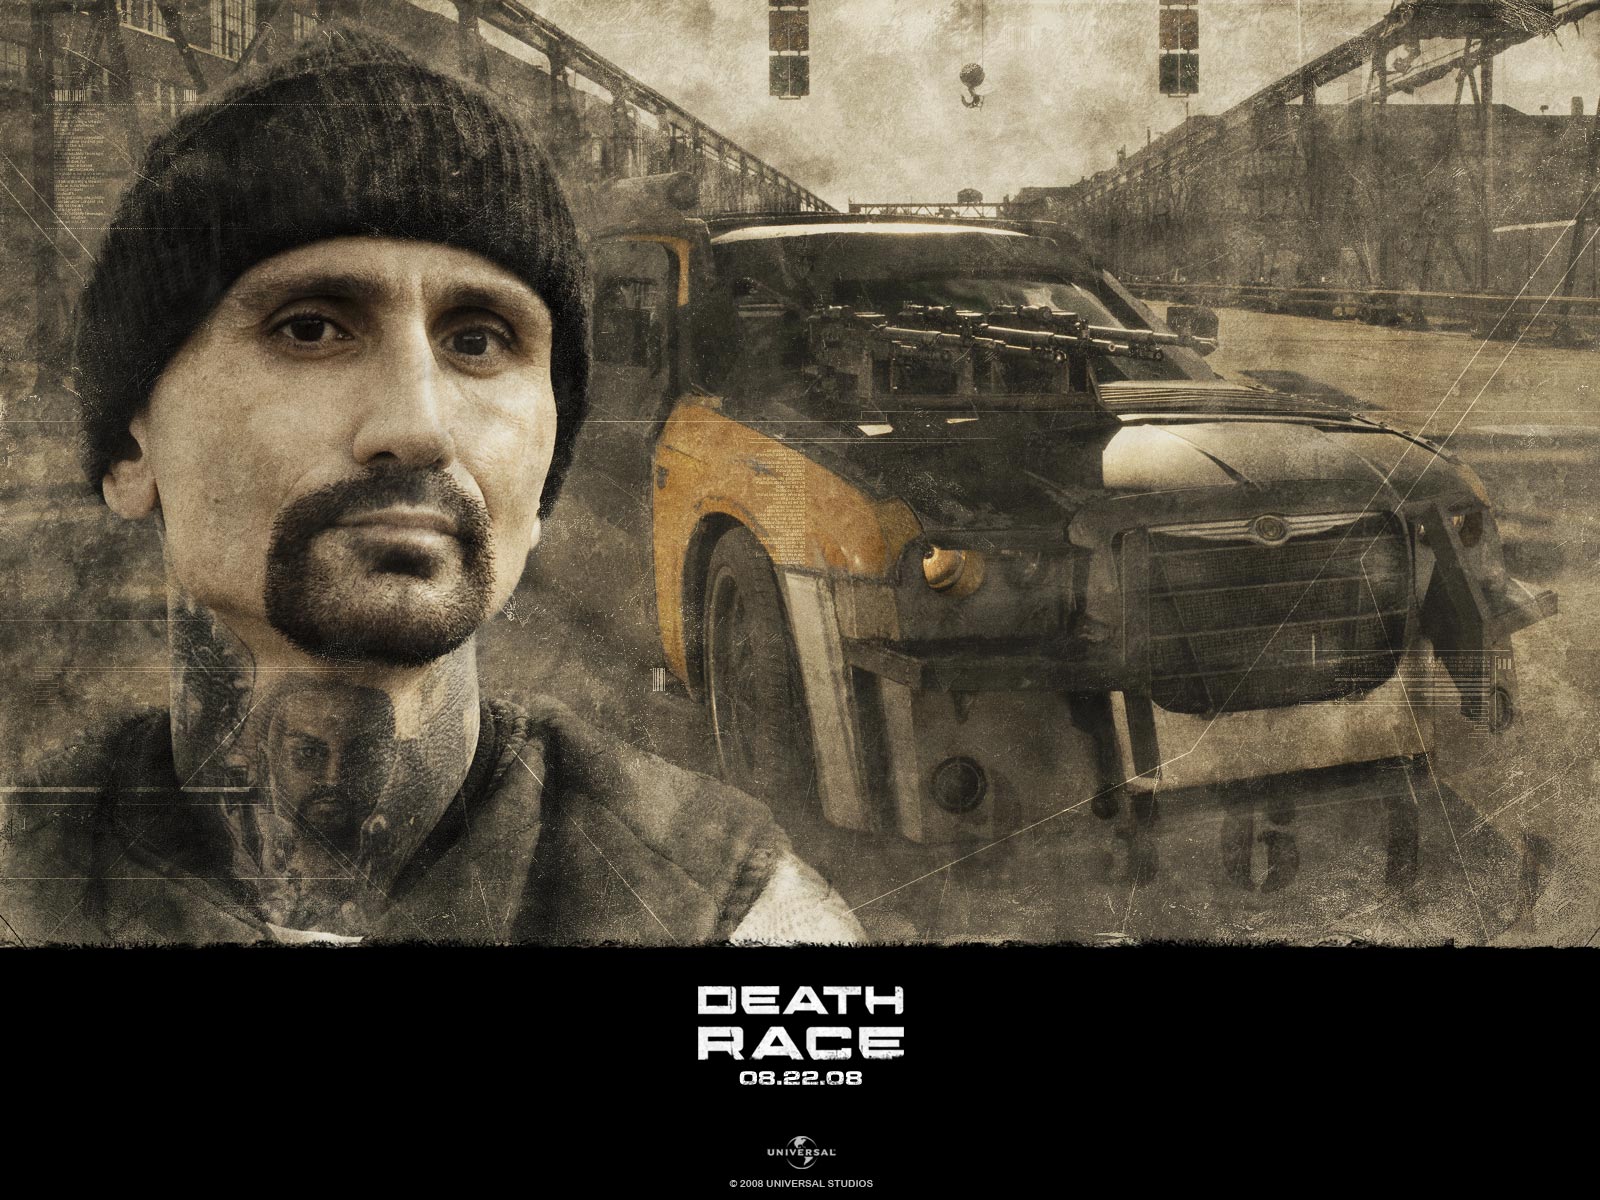 Download full size Death Race wallpaper / Movies / 1600x1200